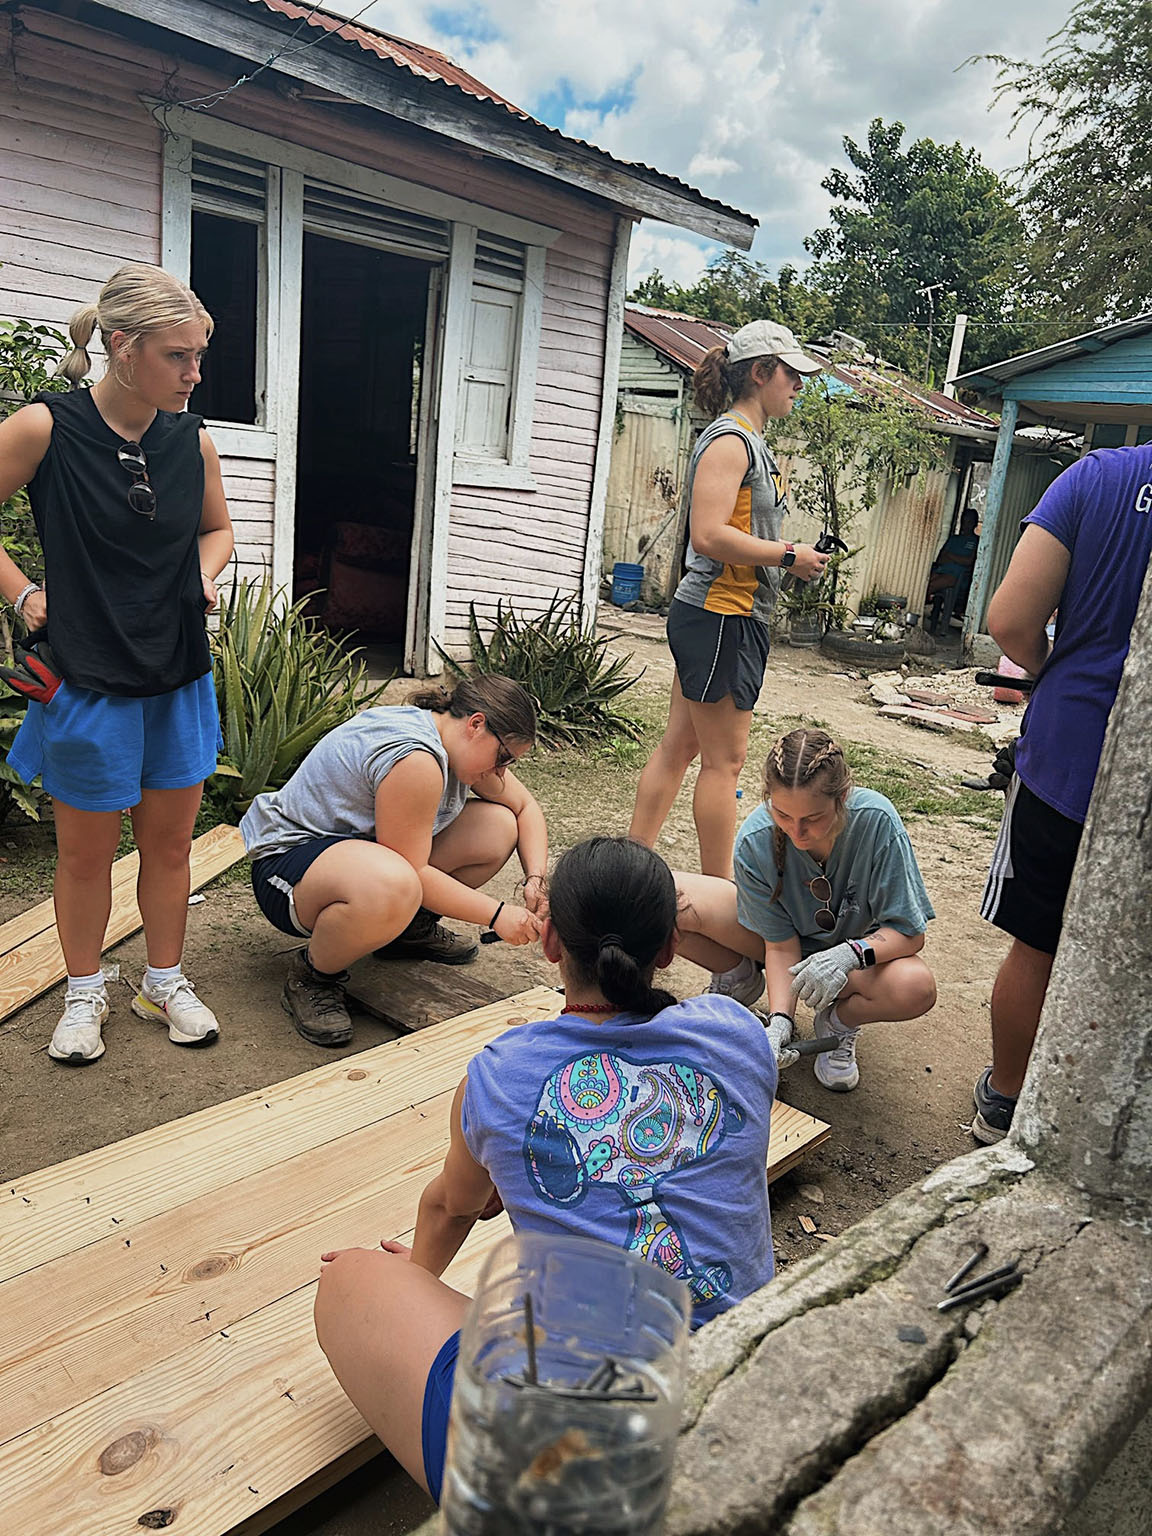 Mount Union students at work in the Dominican